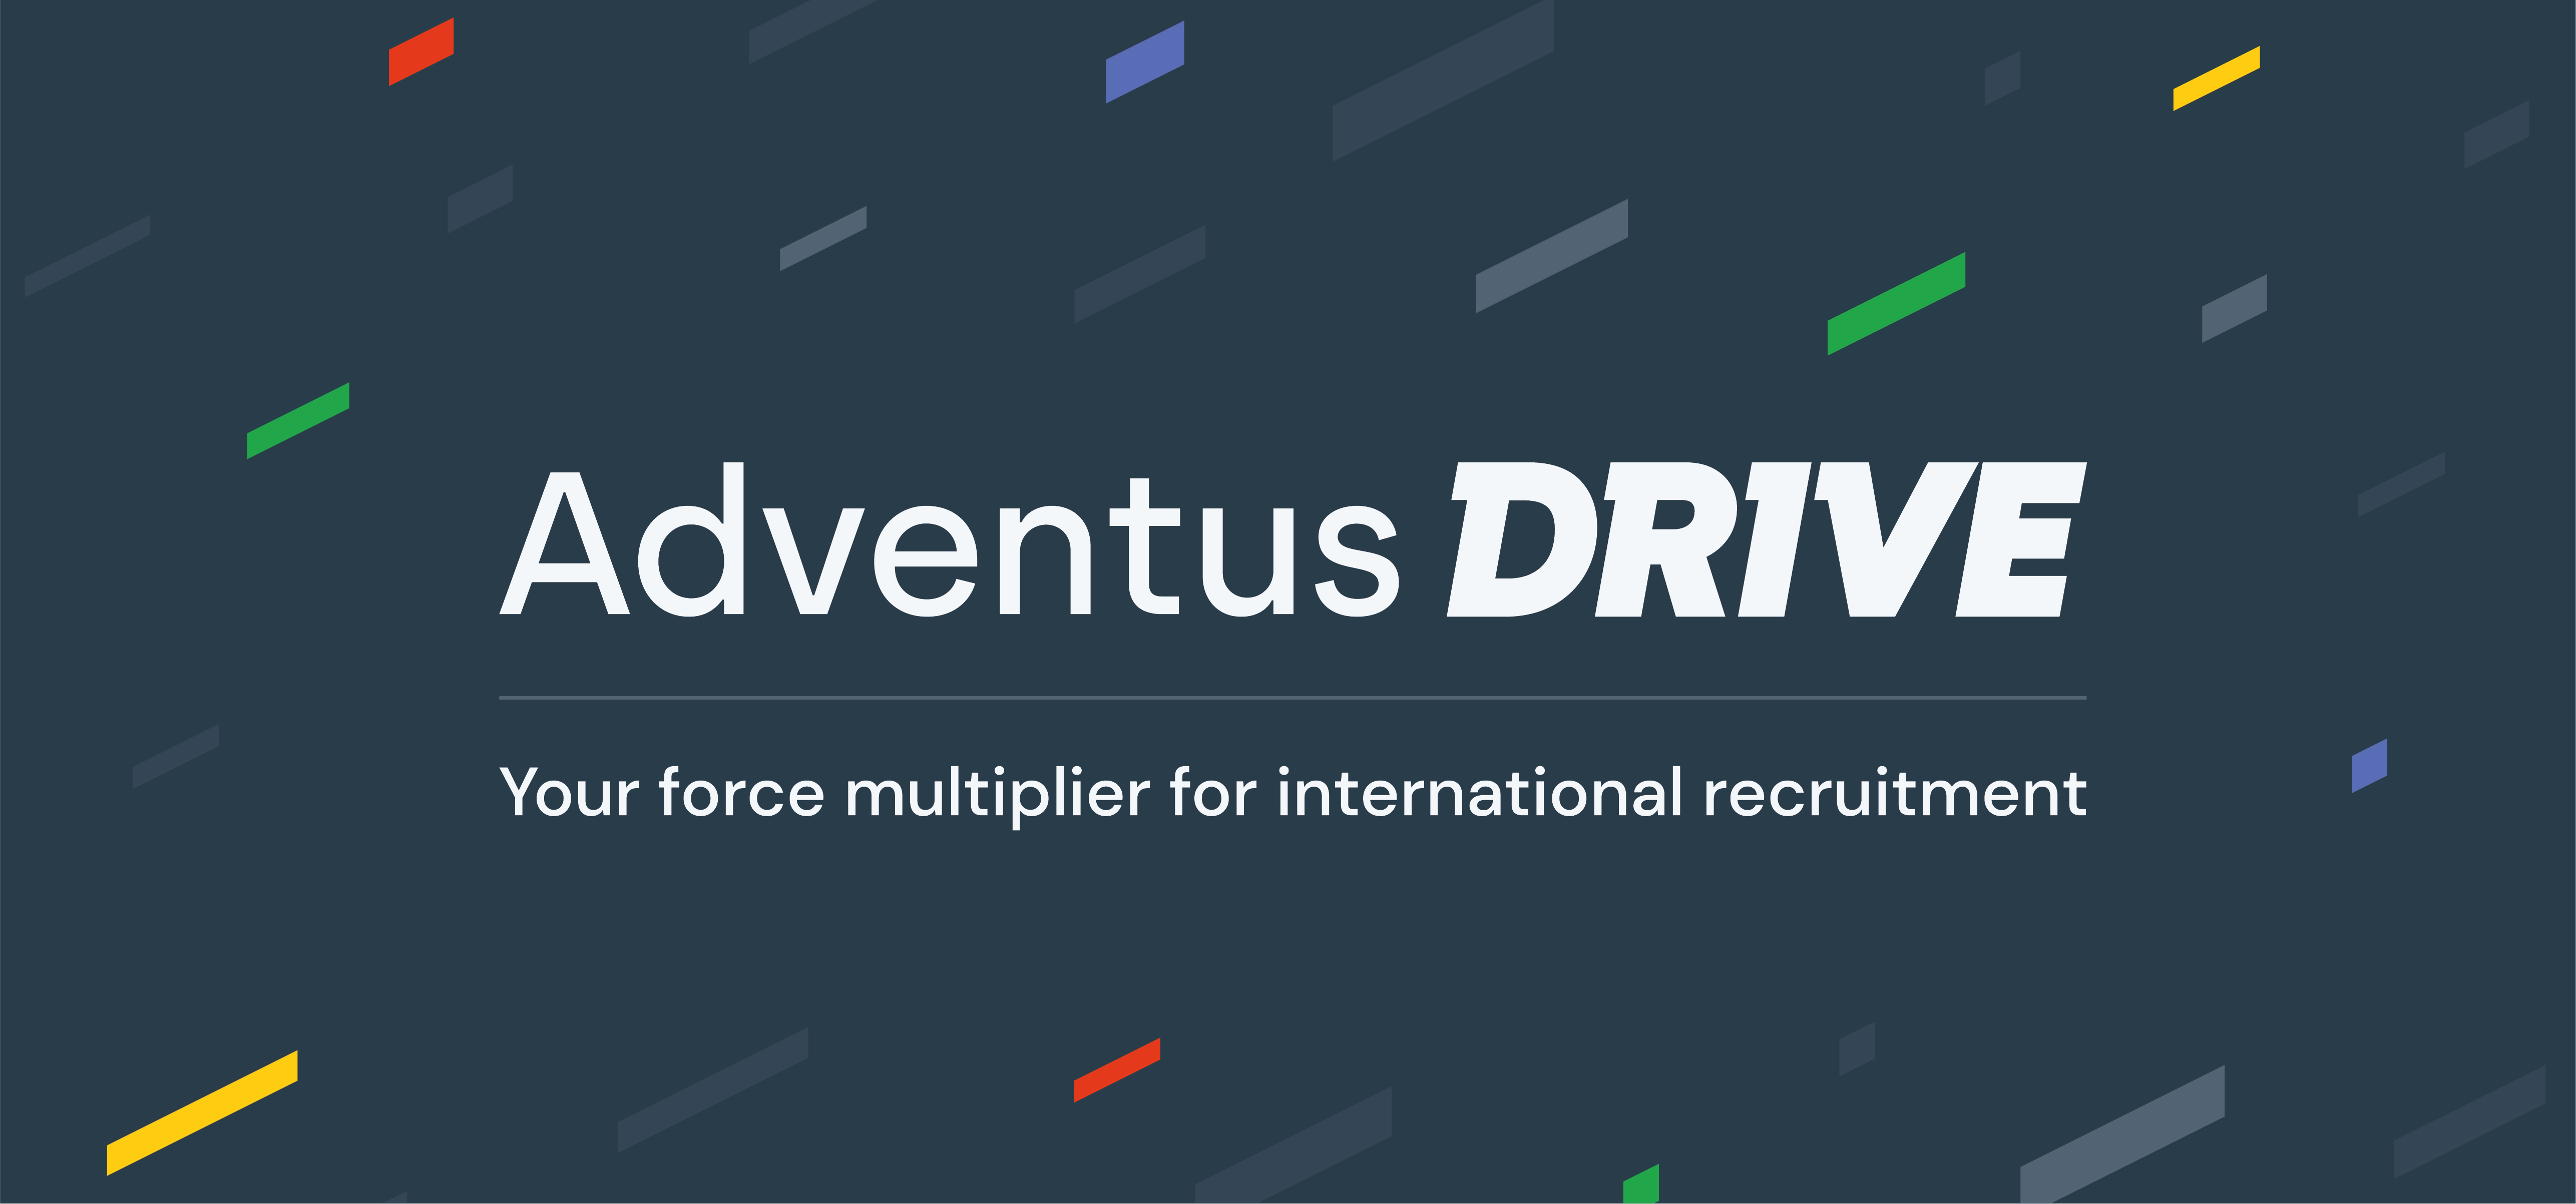 Introducing Adventus Drive: the future of recruitment for institutions